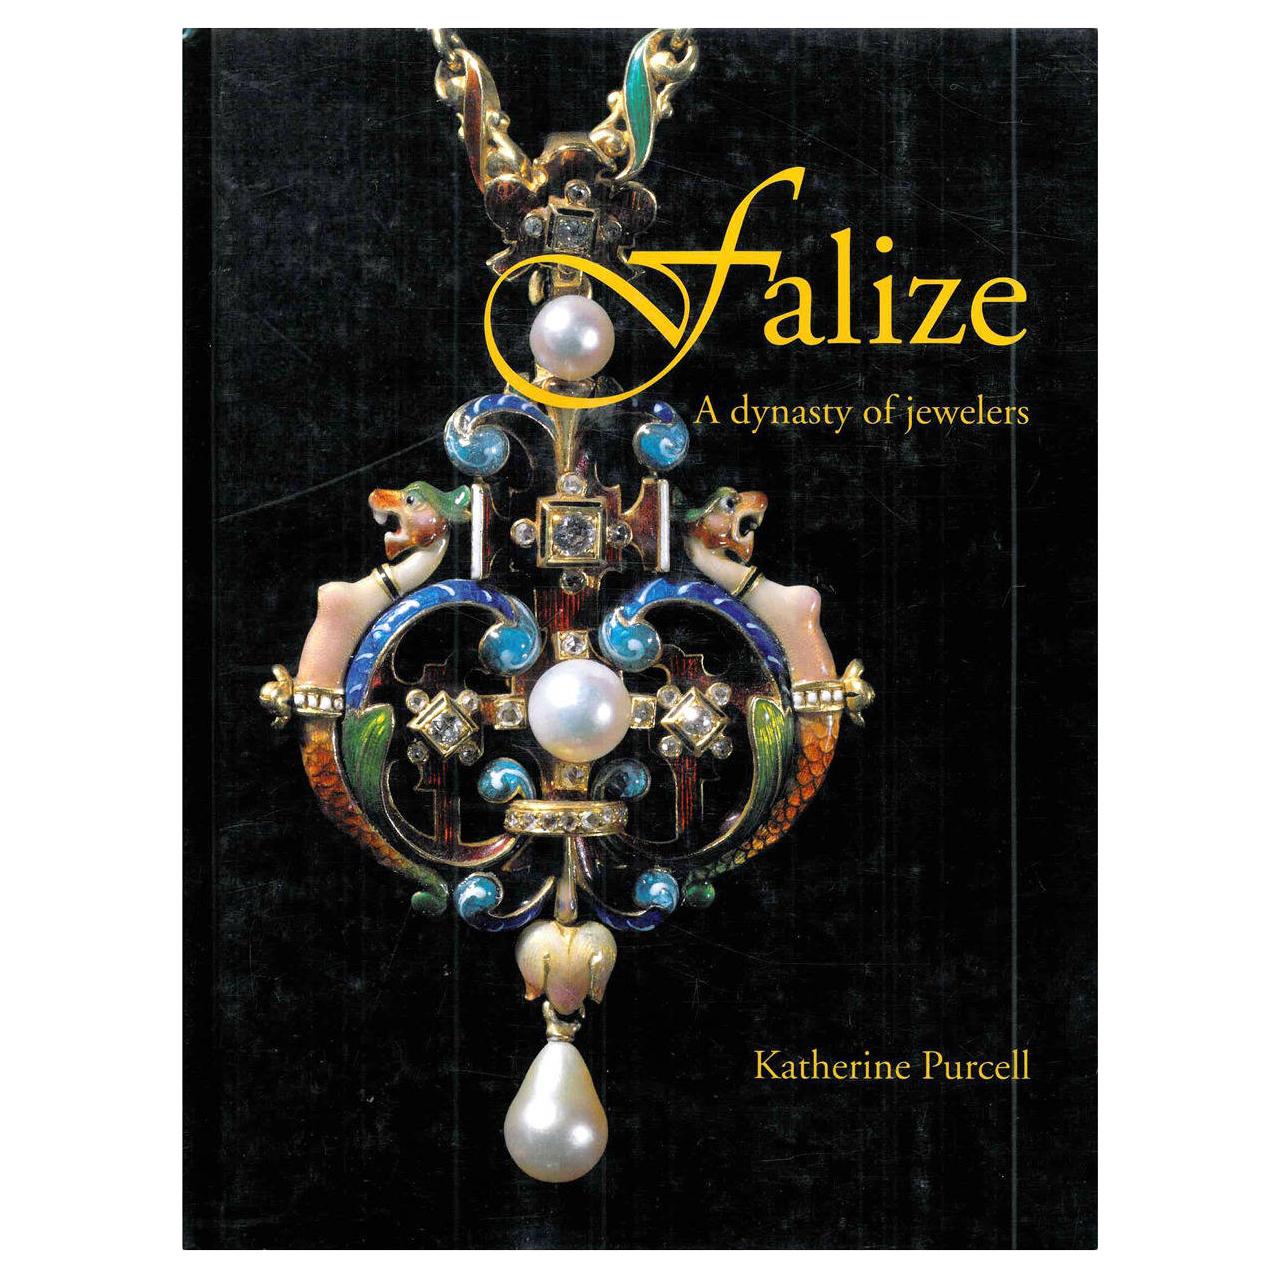 Falize: A Dynasty of Jewelers (Book)